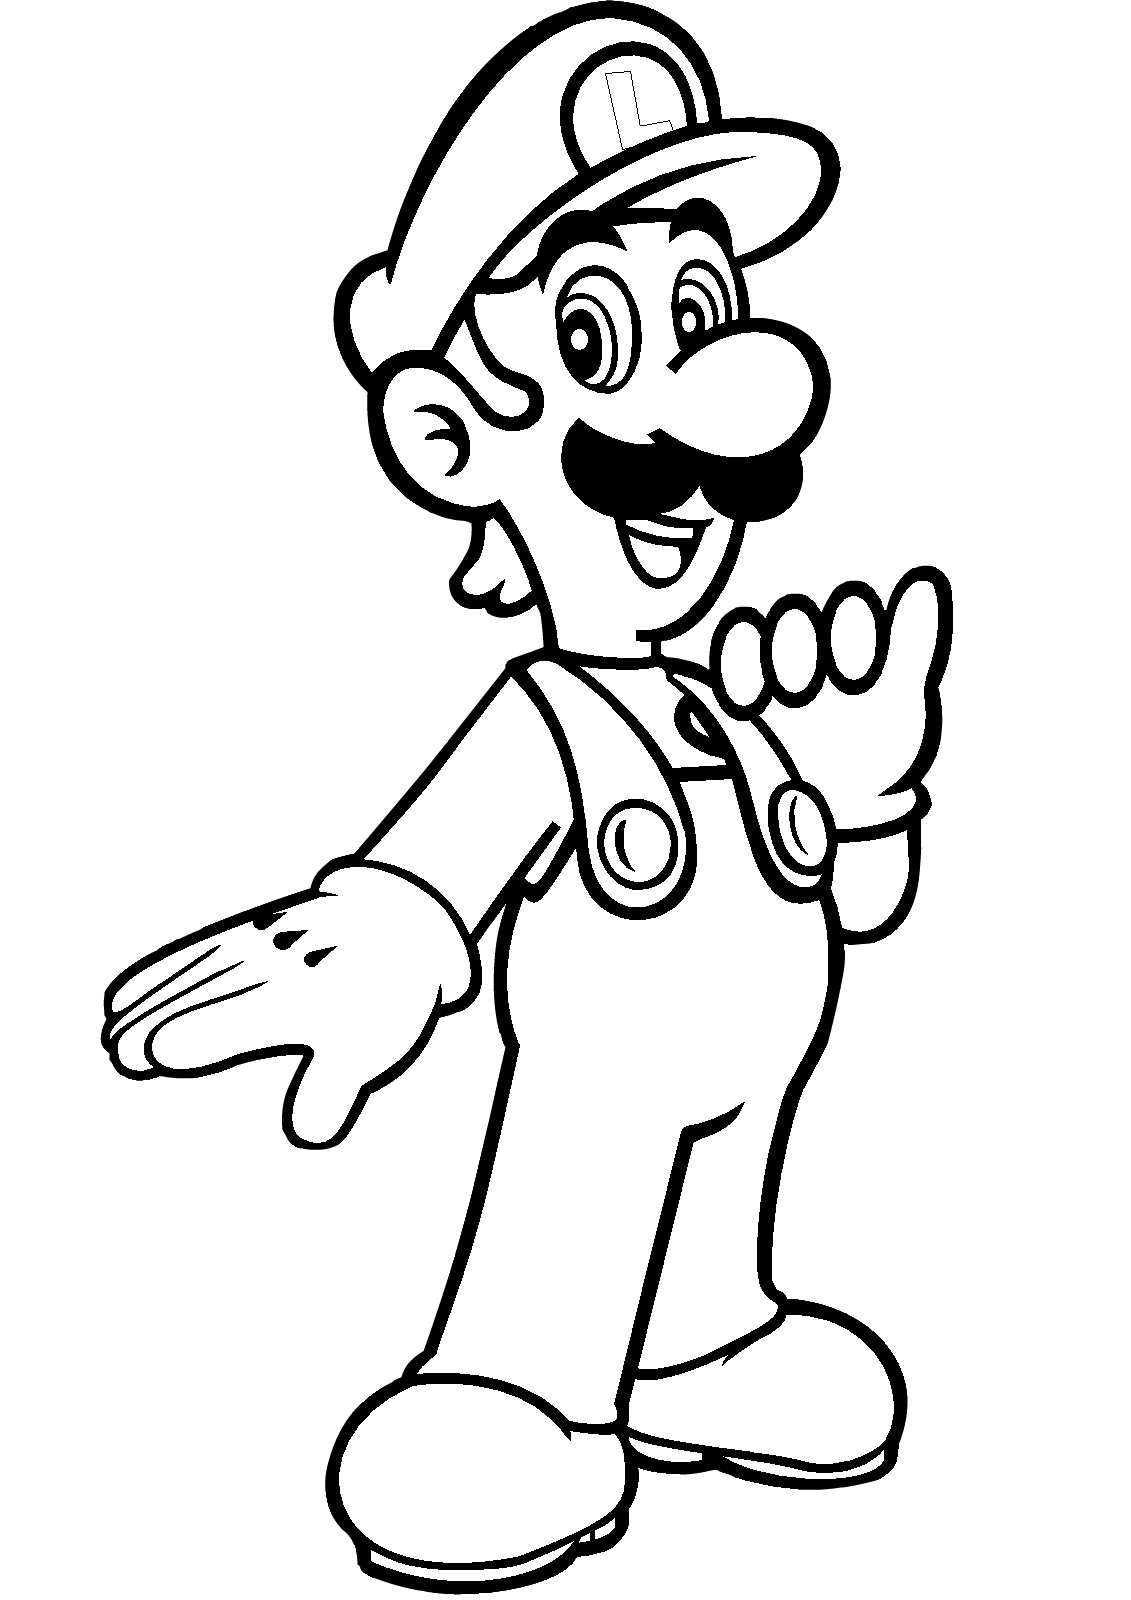 Luigi Mario Bros Coloring Pages Slim and Tall Luigi in Green Color Outfit